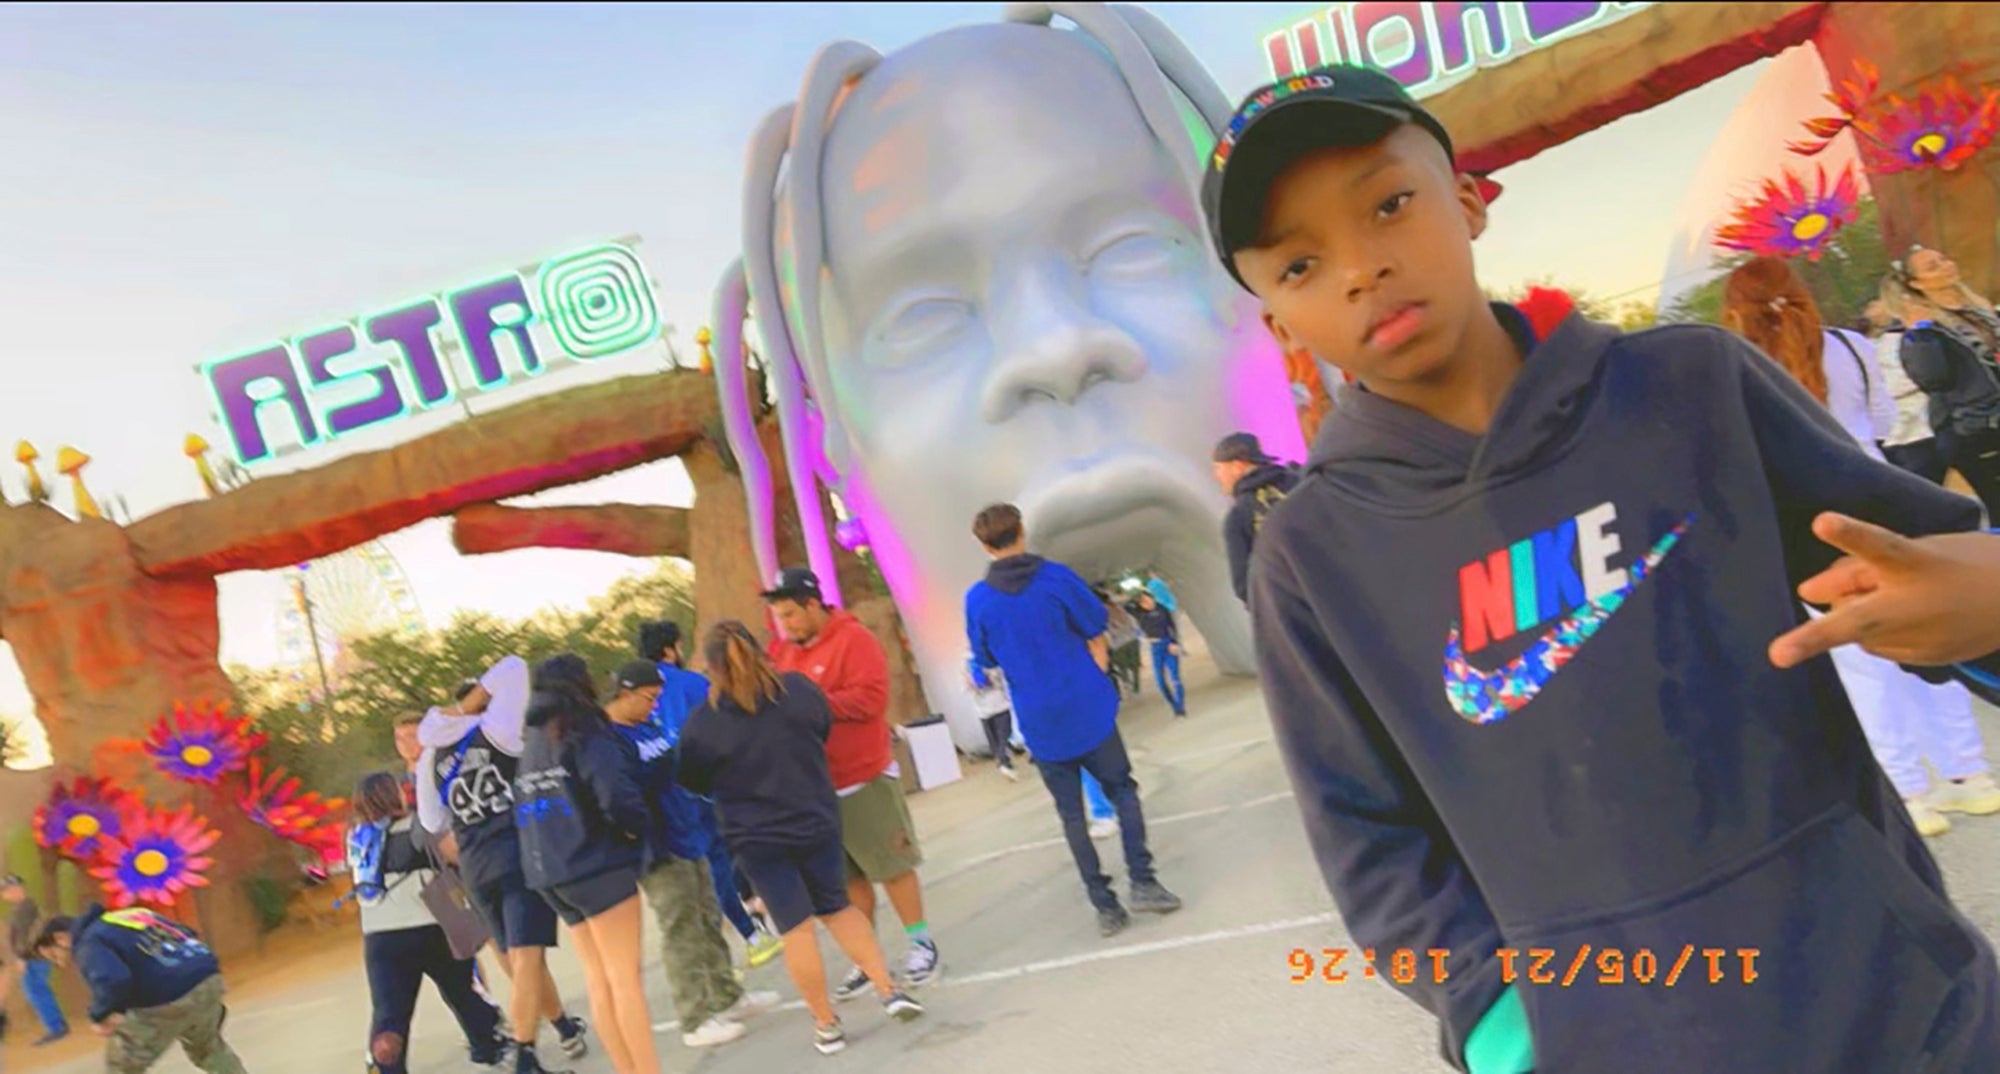 Ezra Blount, 9, the youngest victim of Astroworld music festival posting before the event in a picture provided by his mother